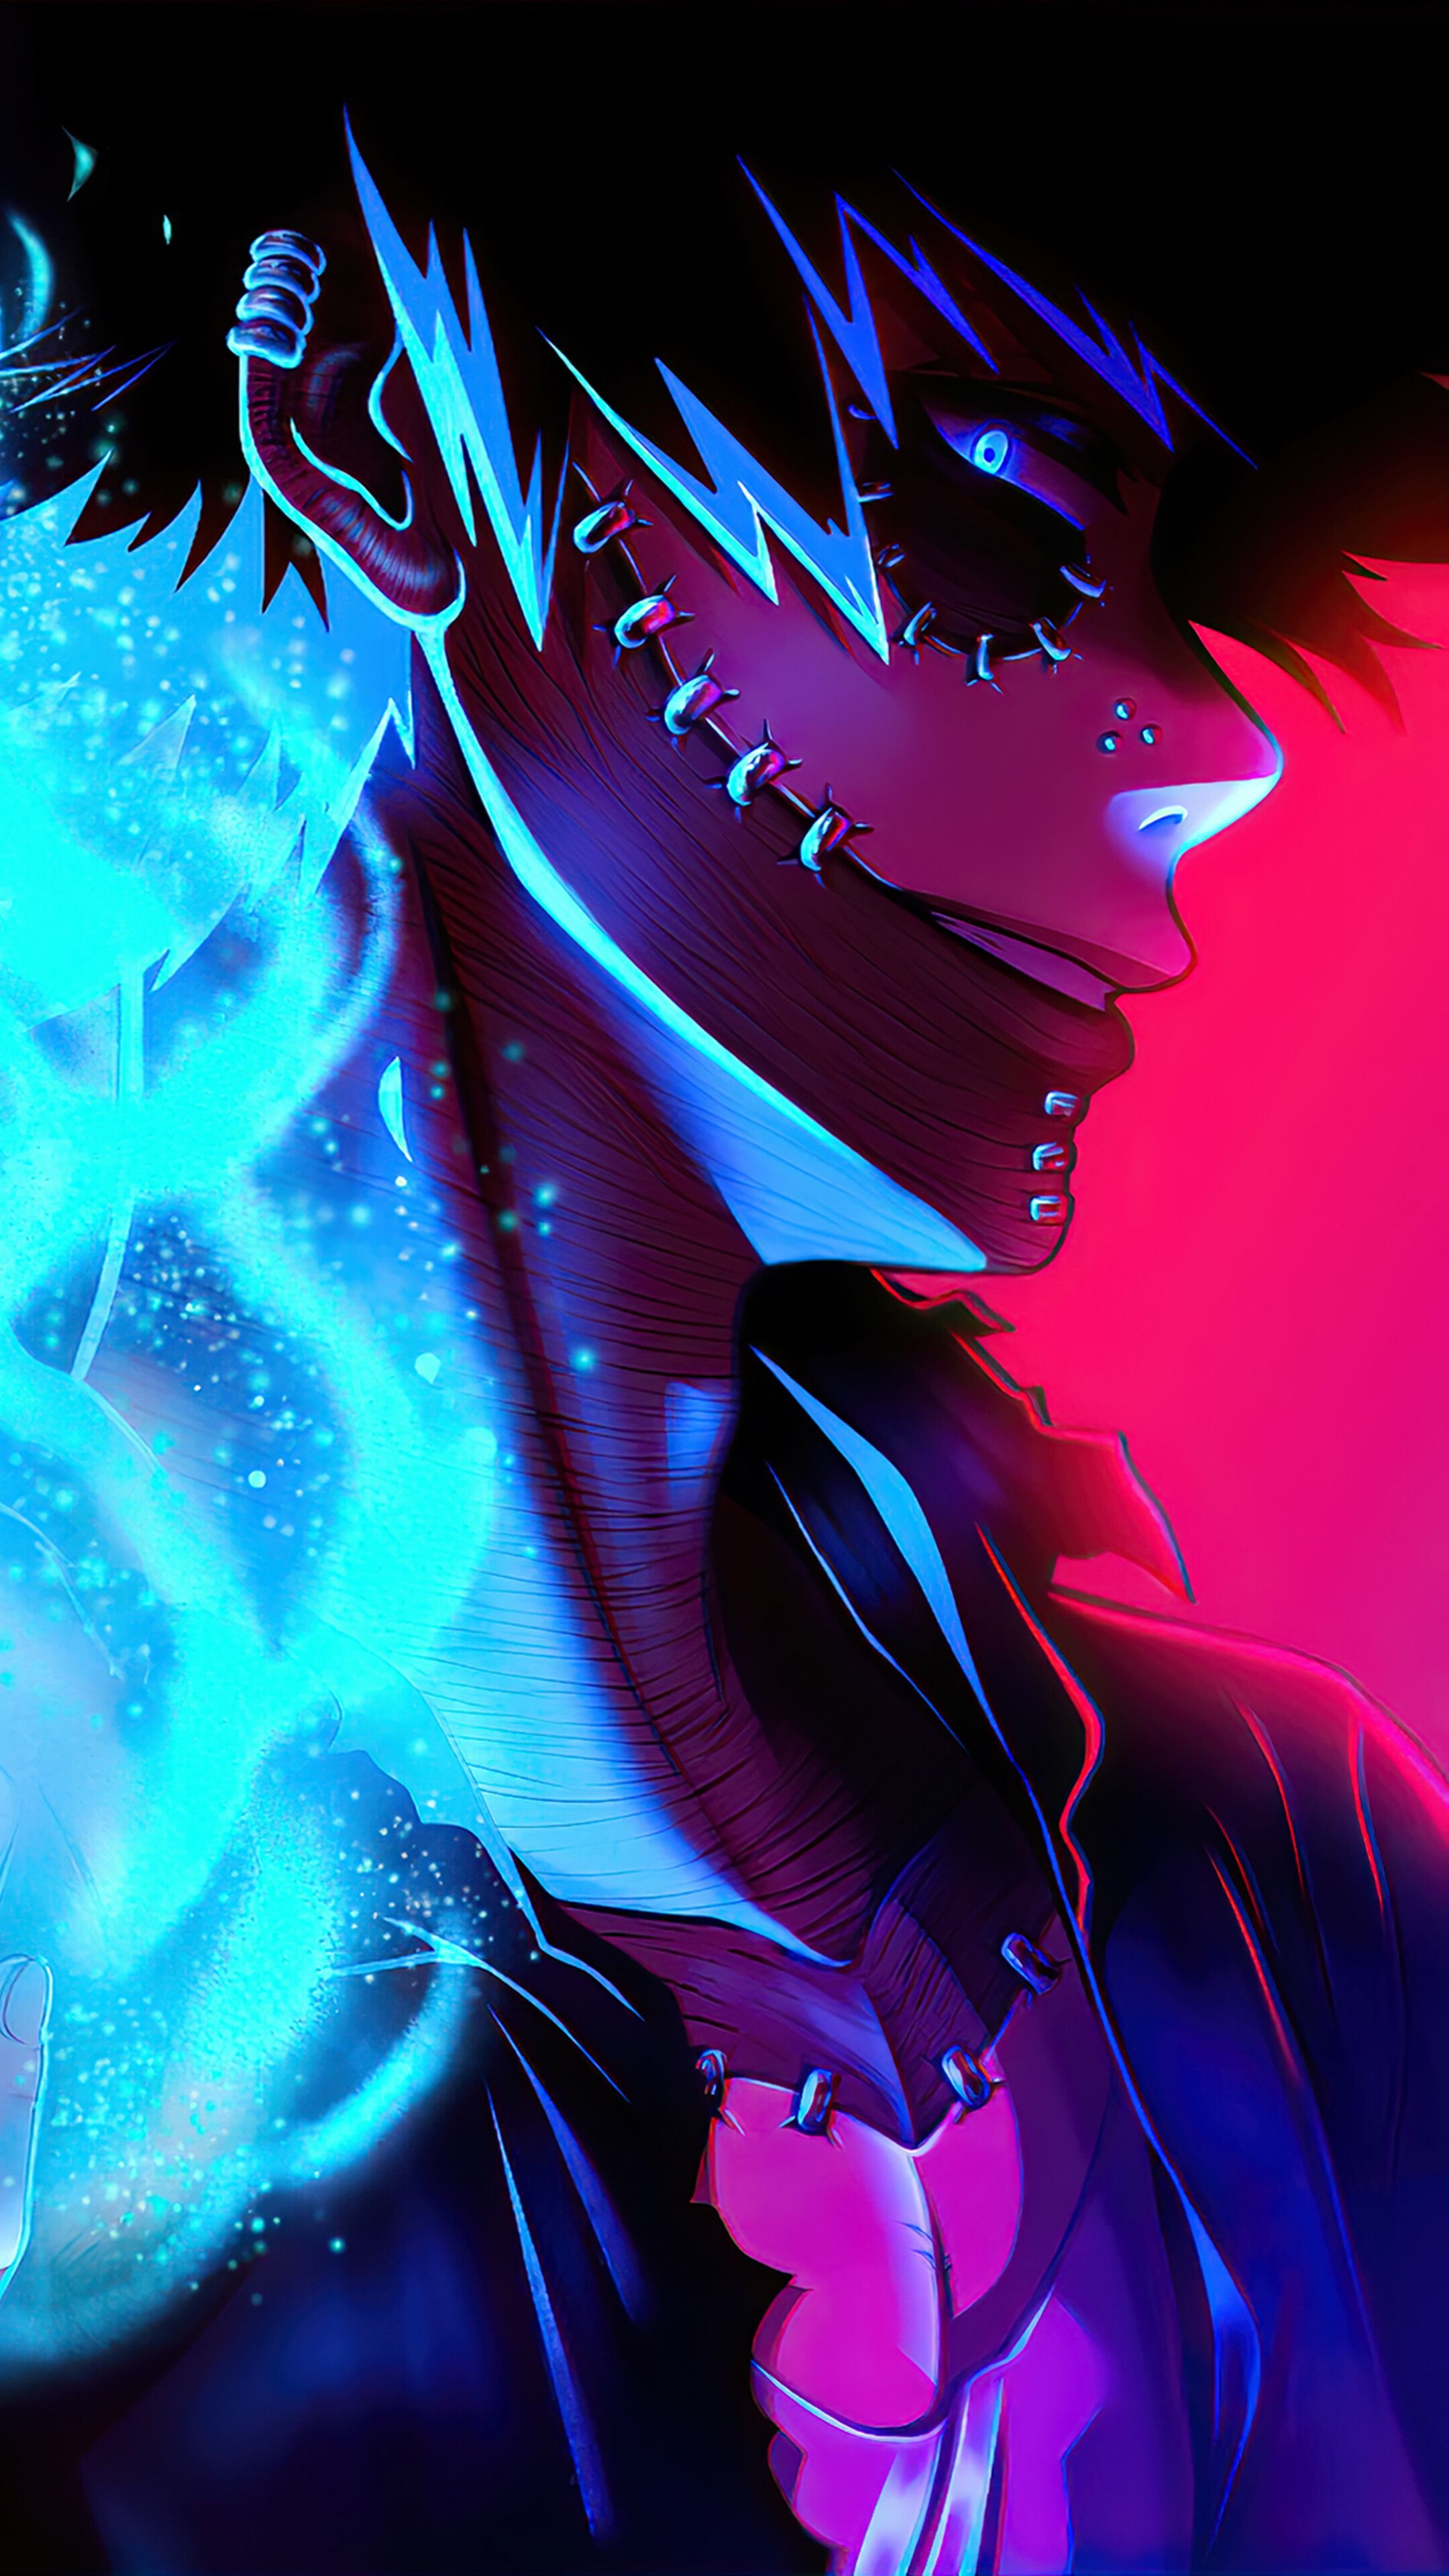 Dabi, Blue, Flame, My Hero Academia, 4K phone HD Wallpaper, Image, Background, Photo and Pictur. Hero wallpaper hd, My hero academia episodes, Hero wallpaper